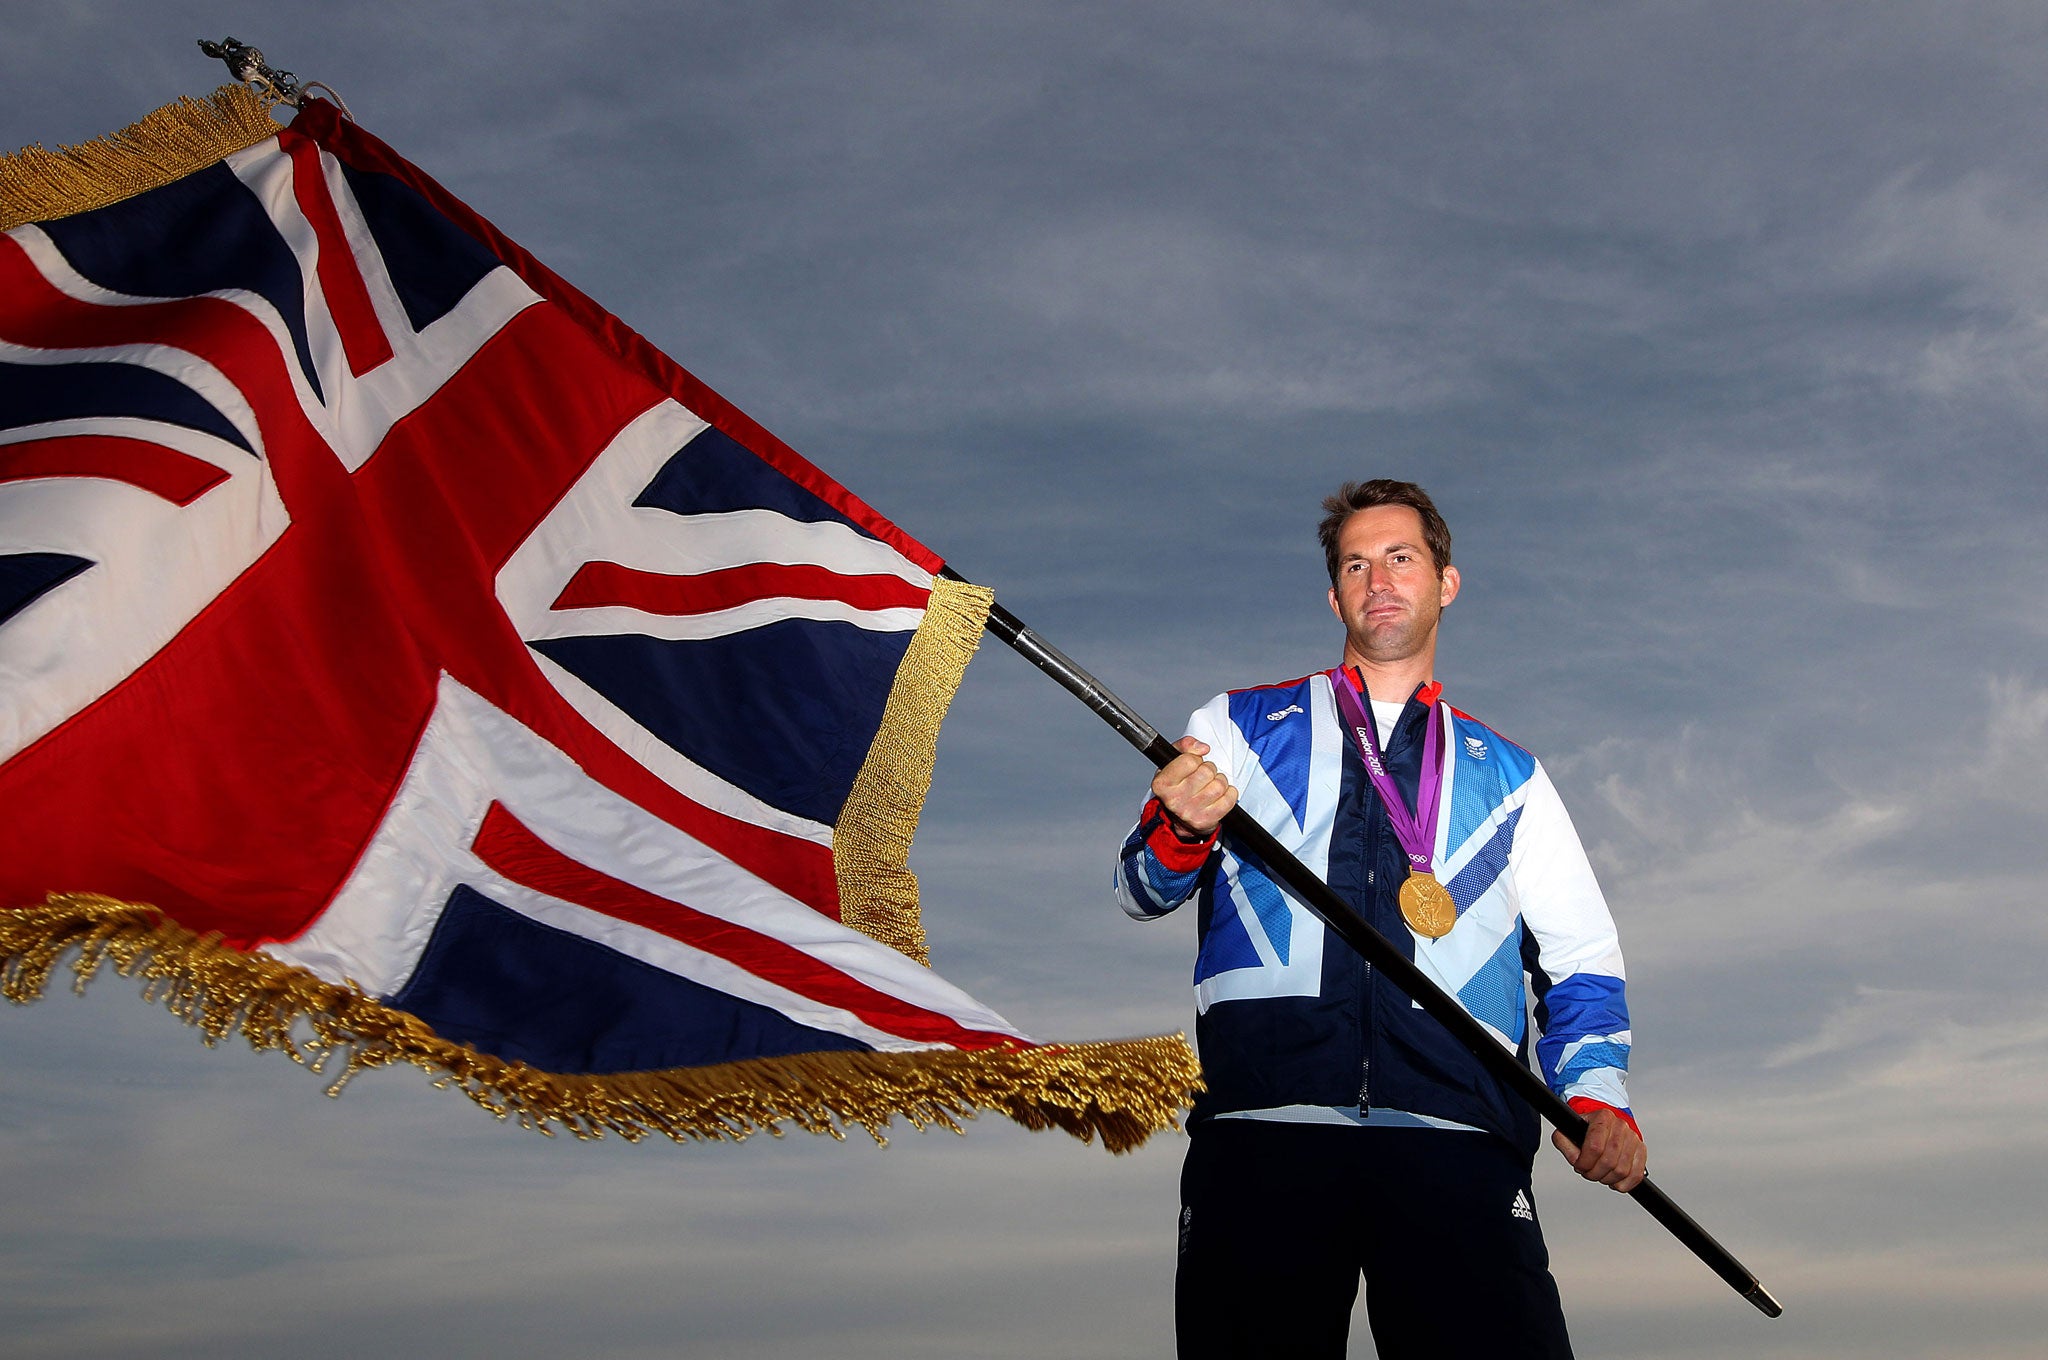 Ben Ainslie The Olympics' most successful sailor on tactics, flying